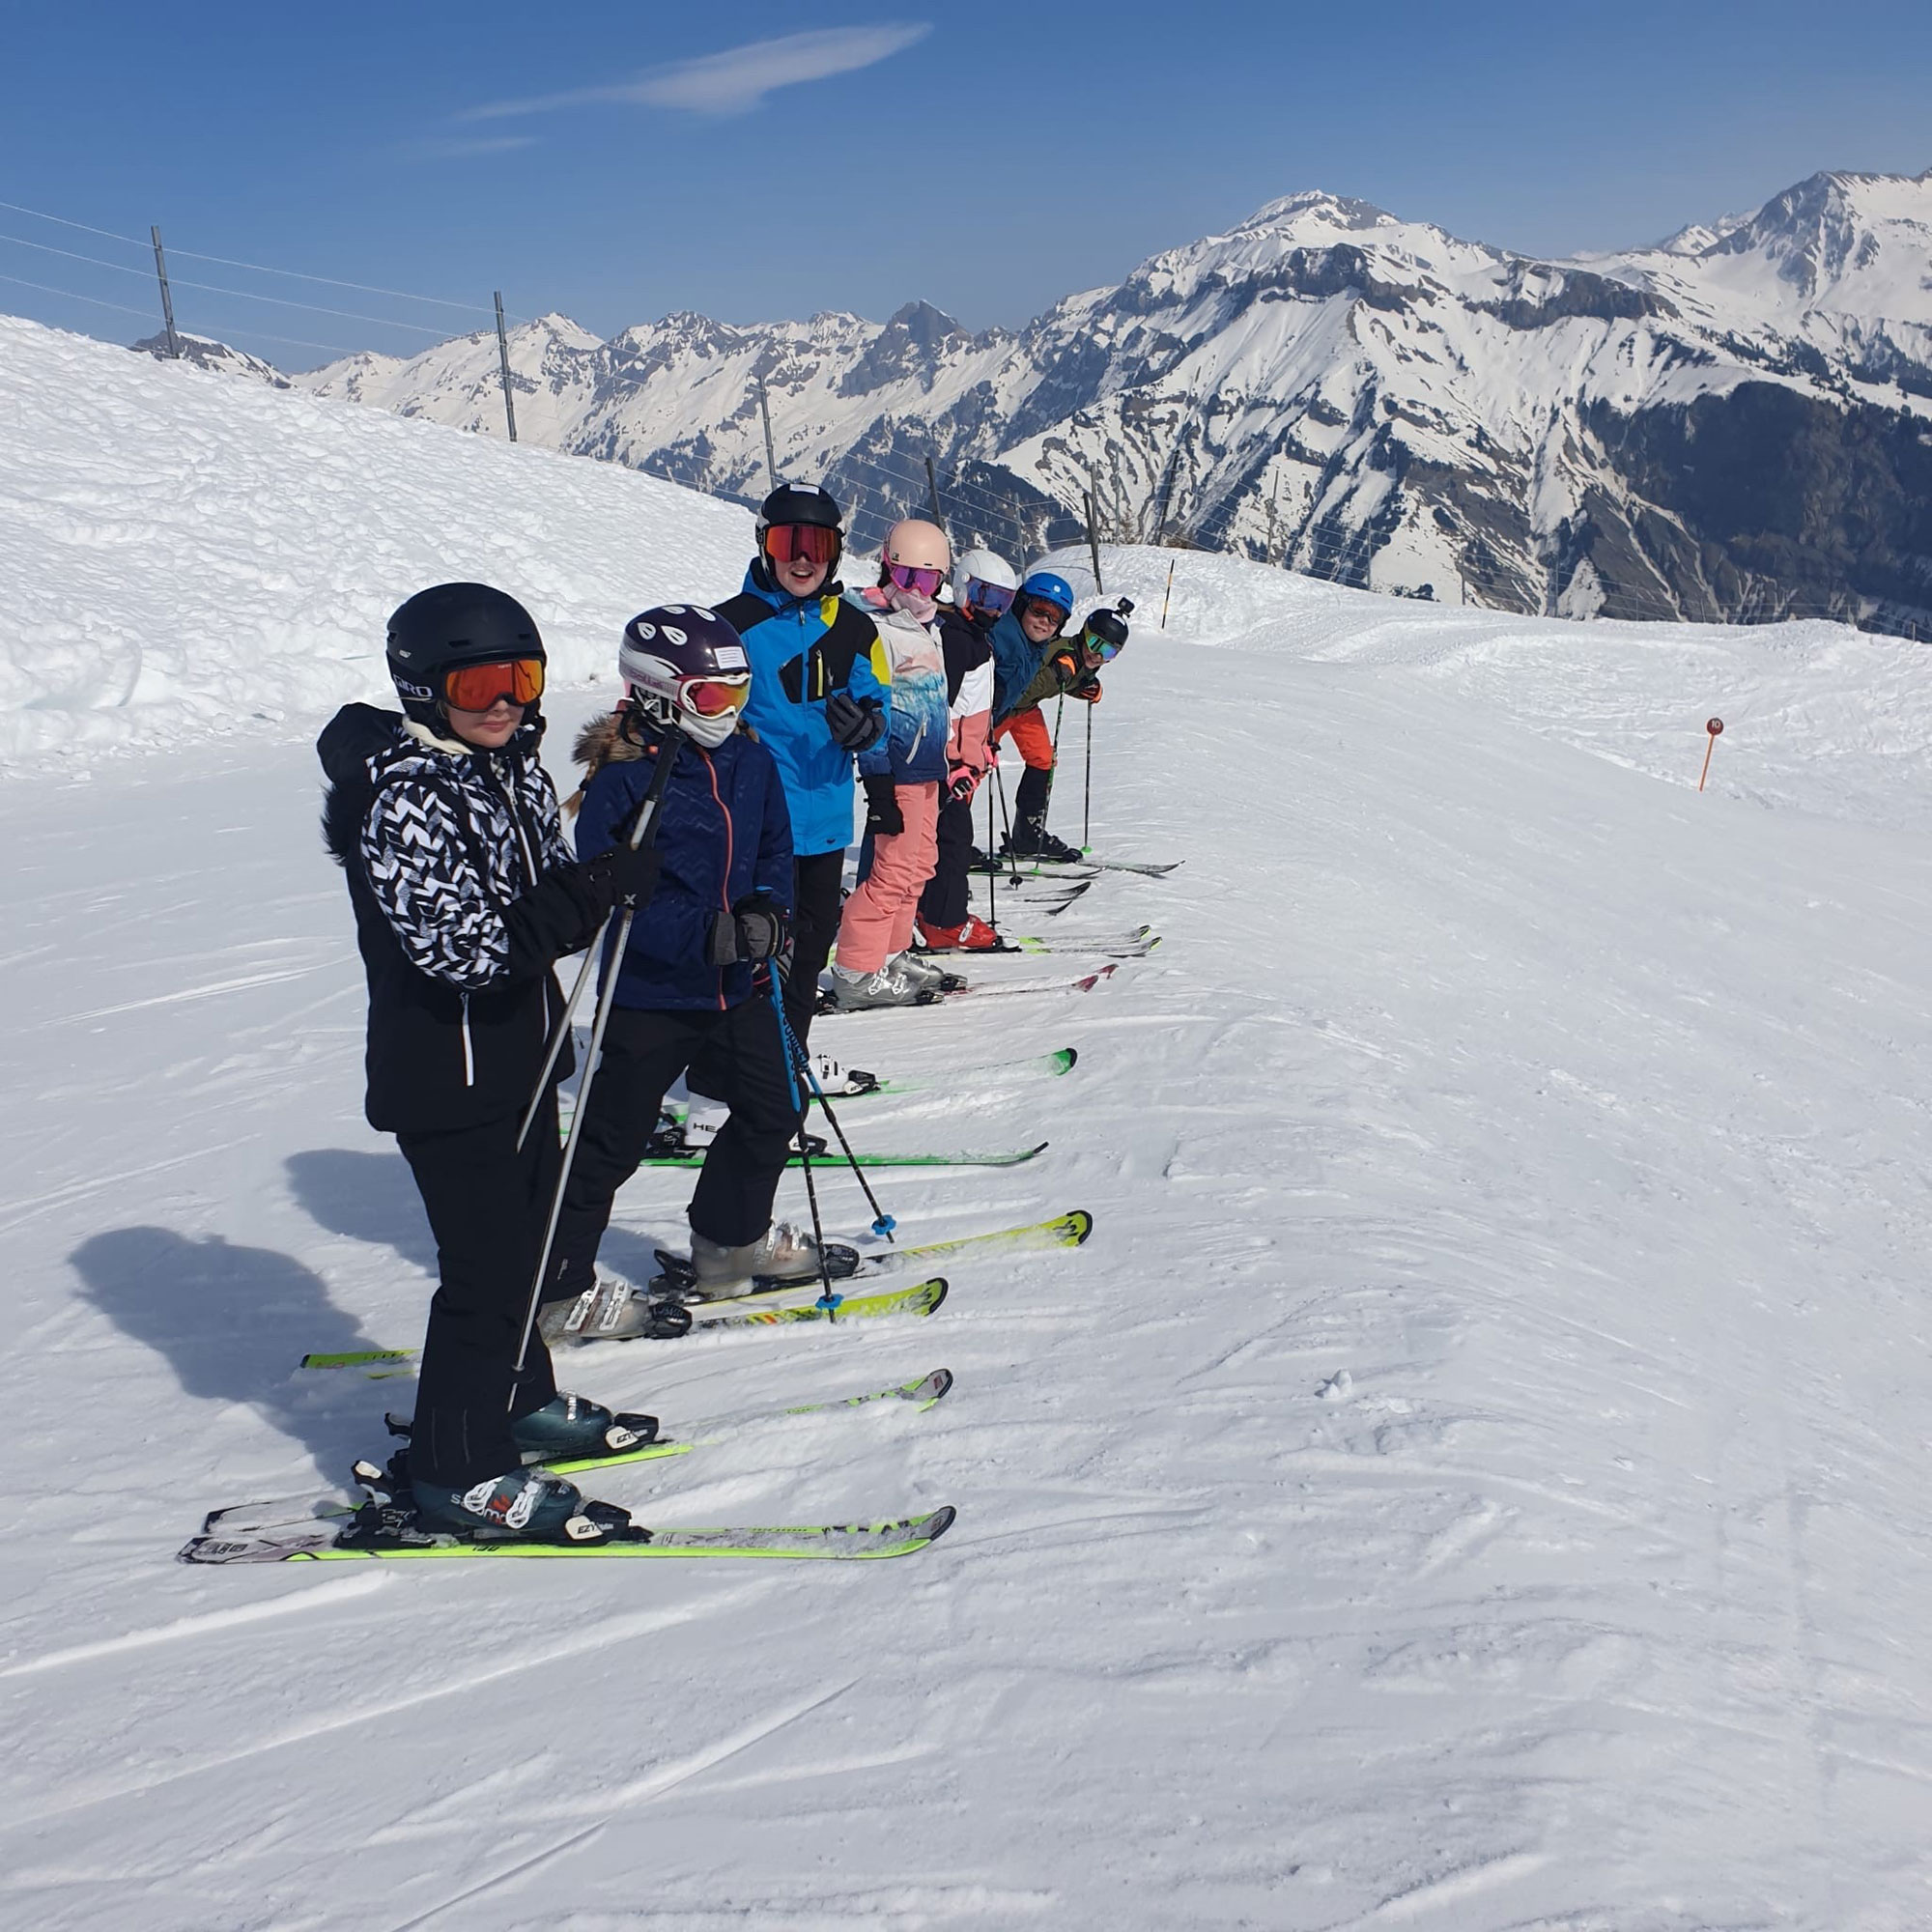 Students stand side by side on skis on the ski slope on ski day.	